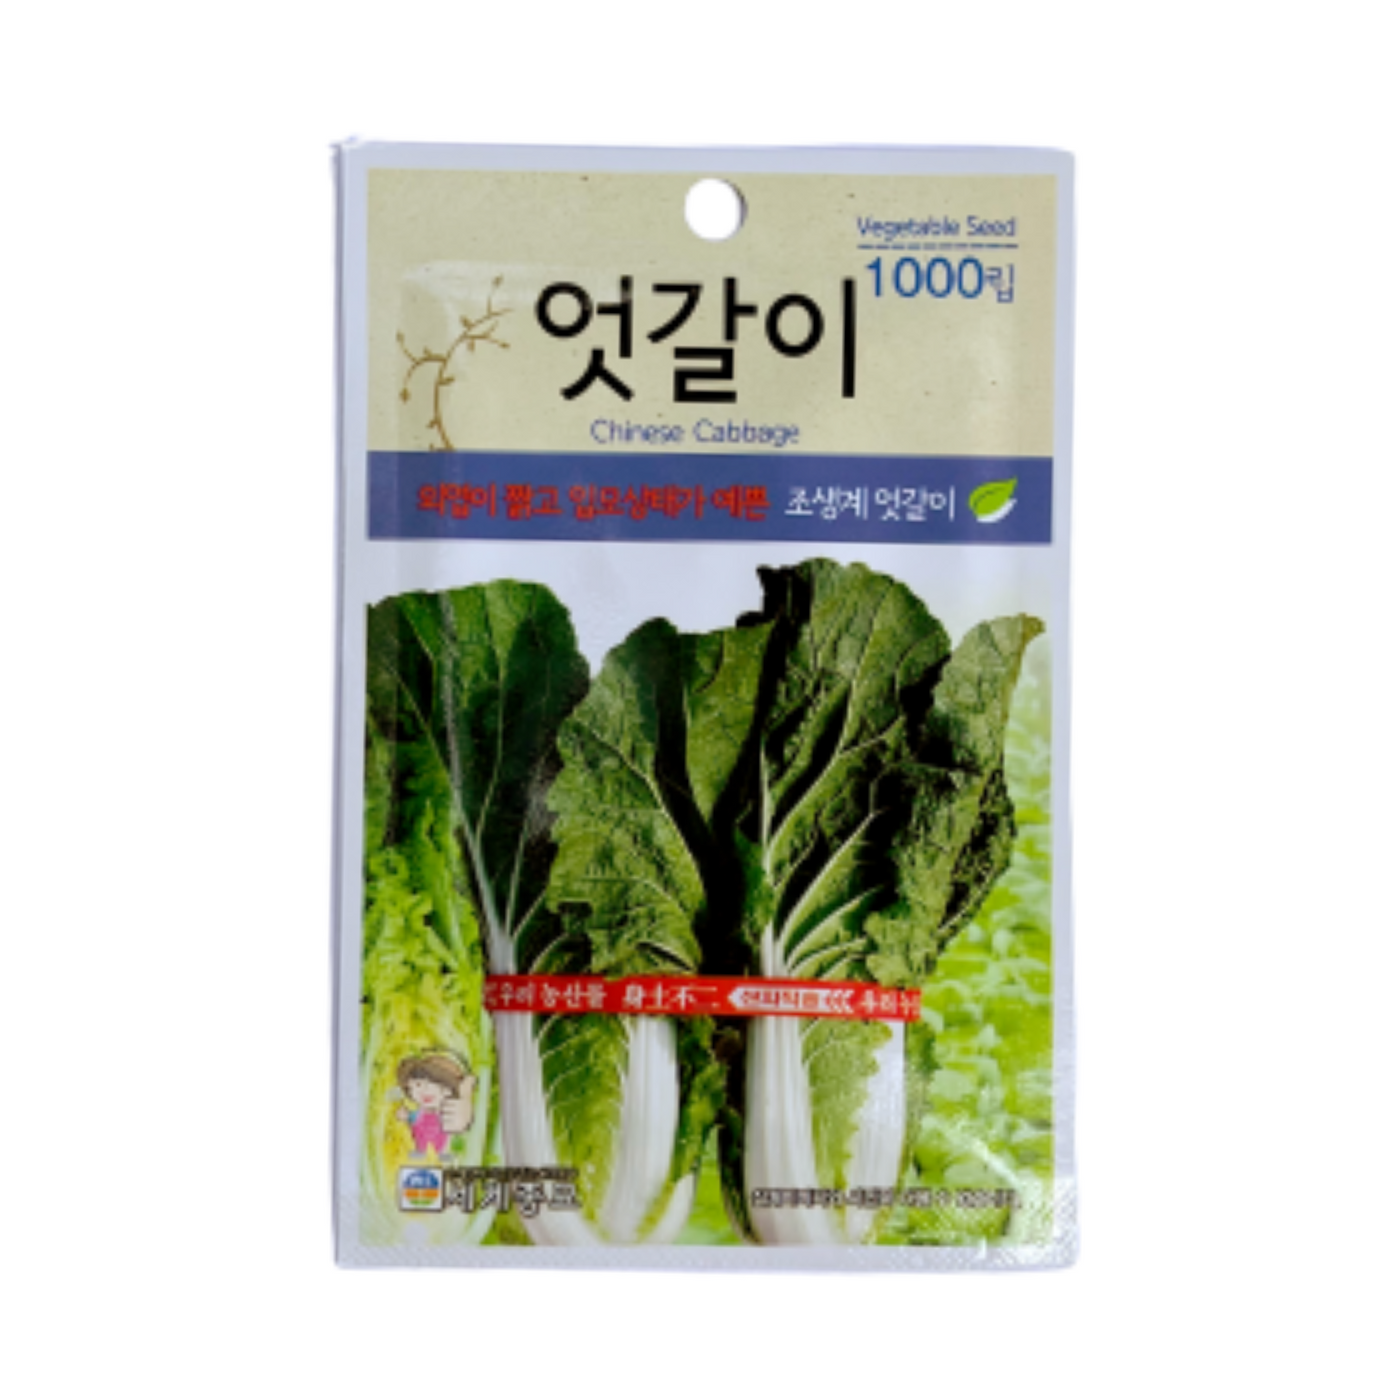 #[World seedlings] Mixed cabbage seeds (1000 lip)